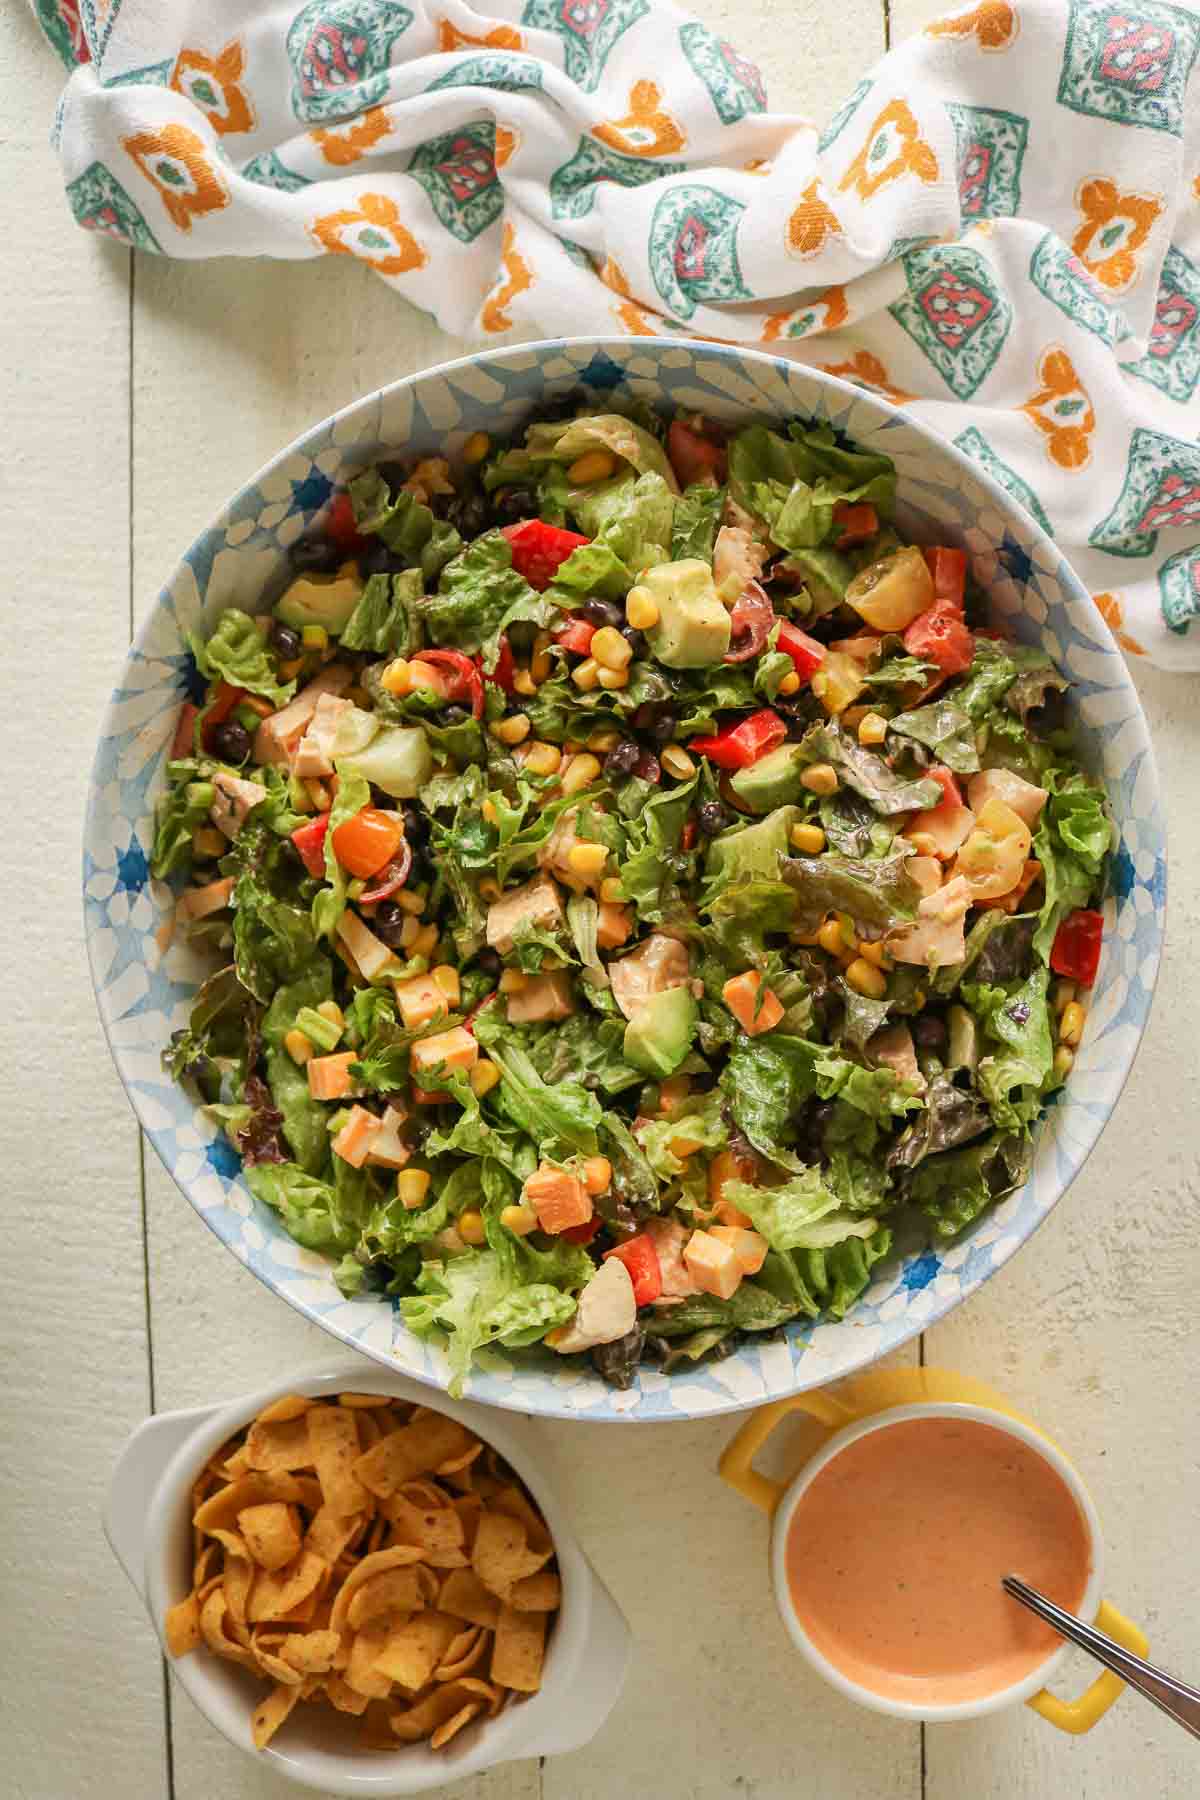 Southwest chicken salad in a serving bowl alongside corn chips and chipotle salad dressing.